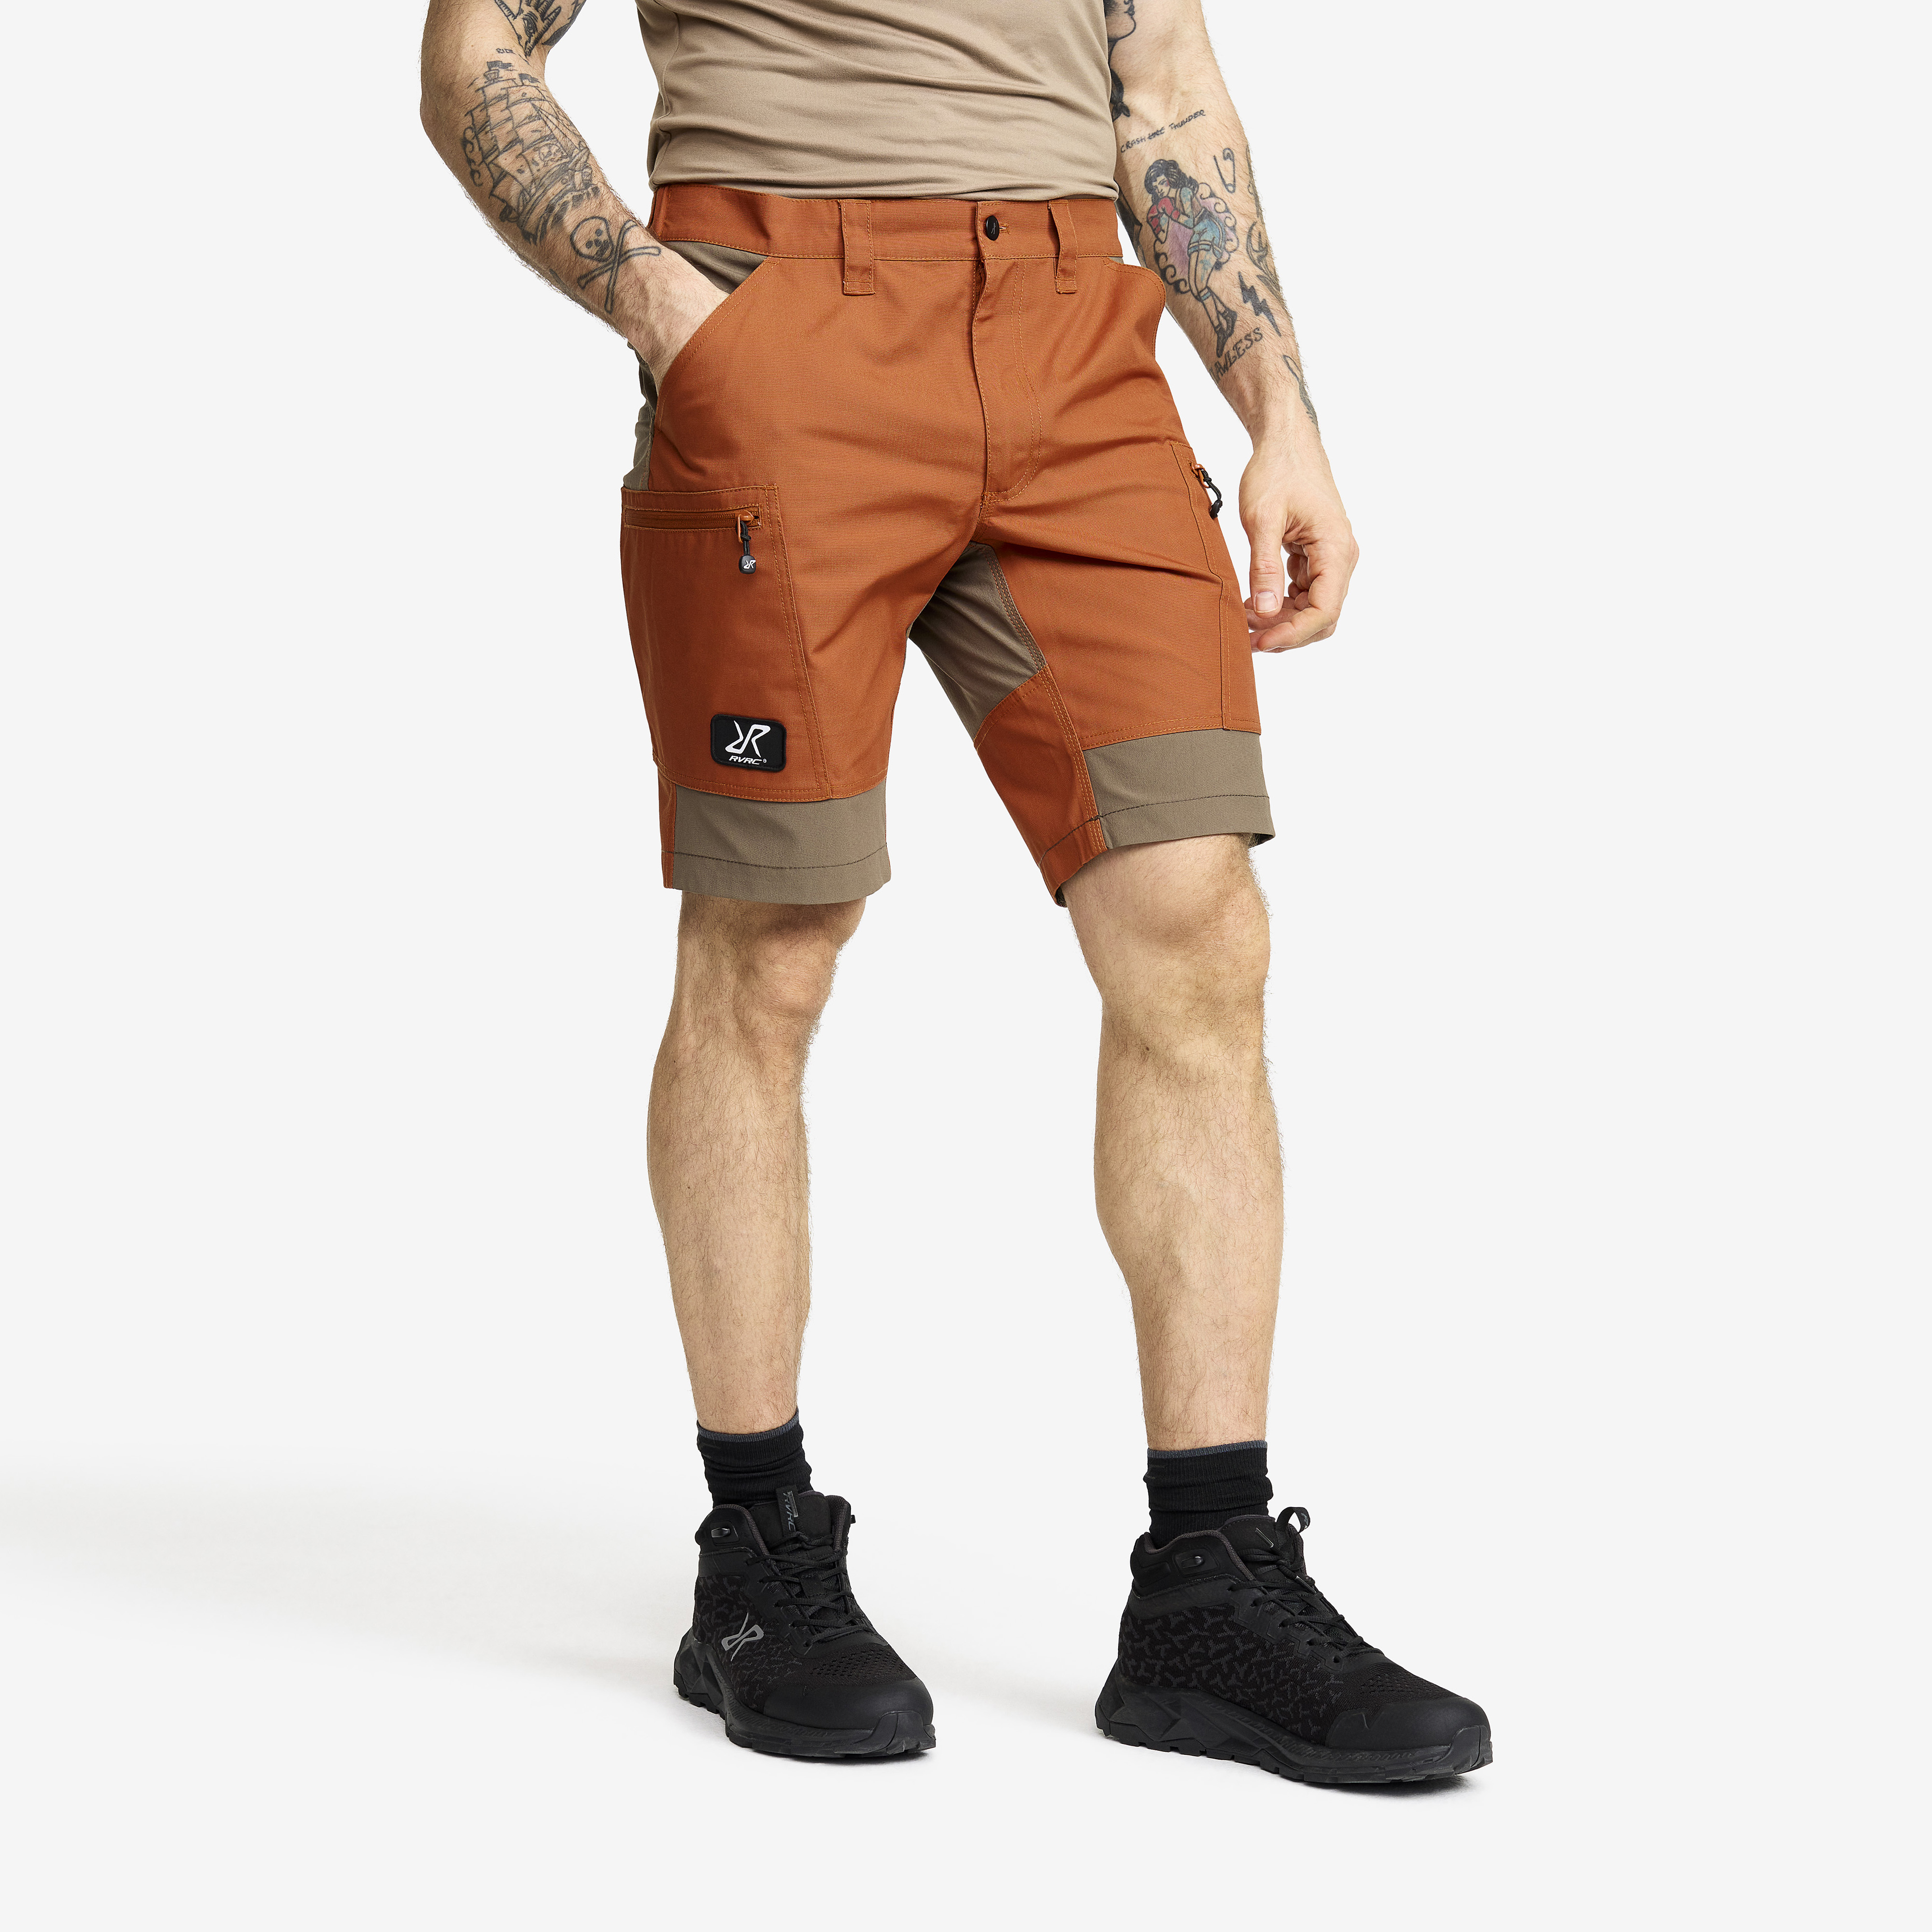 Nordwand Shorts Teracotta Brown/chocolate Chip Miehet